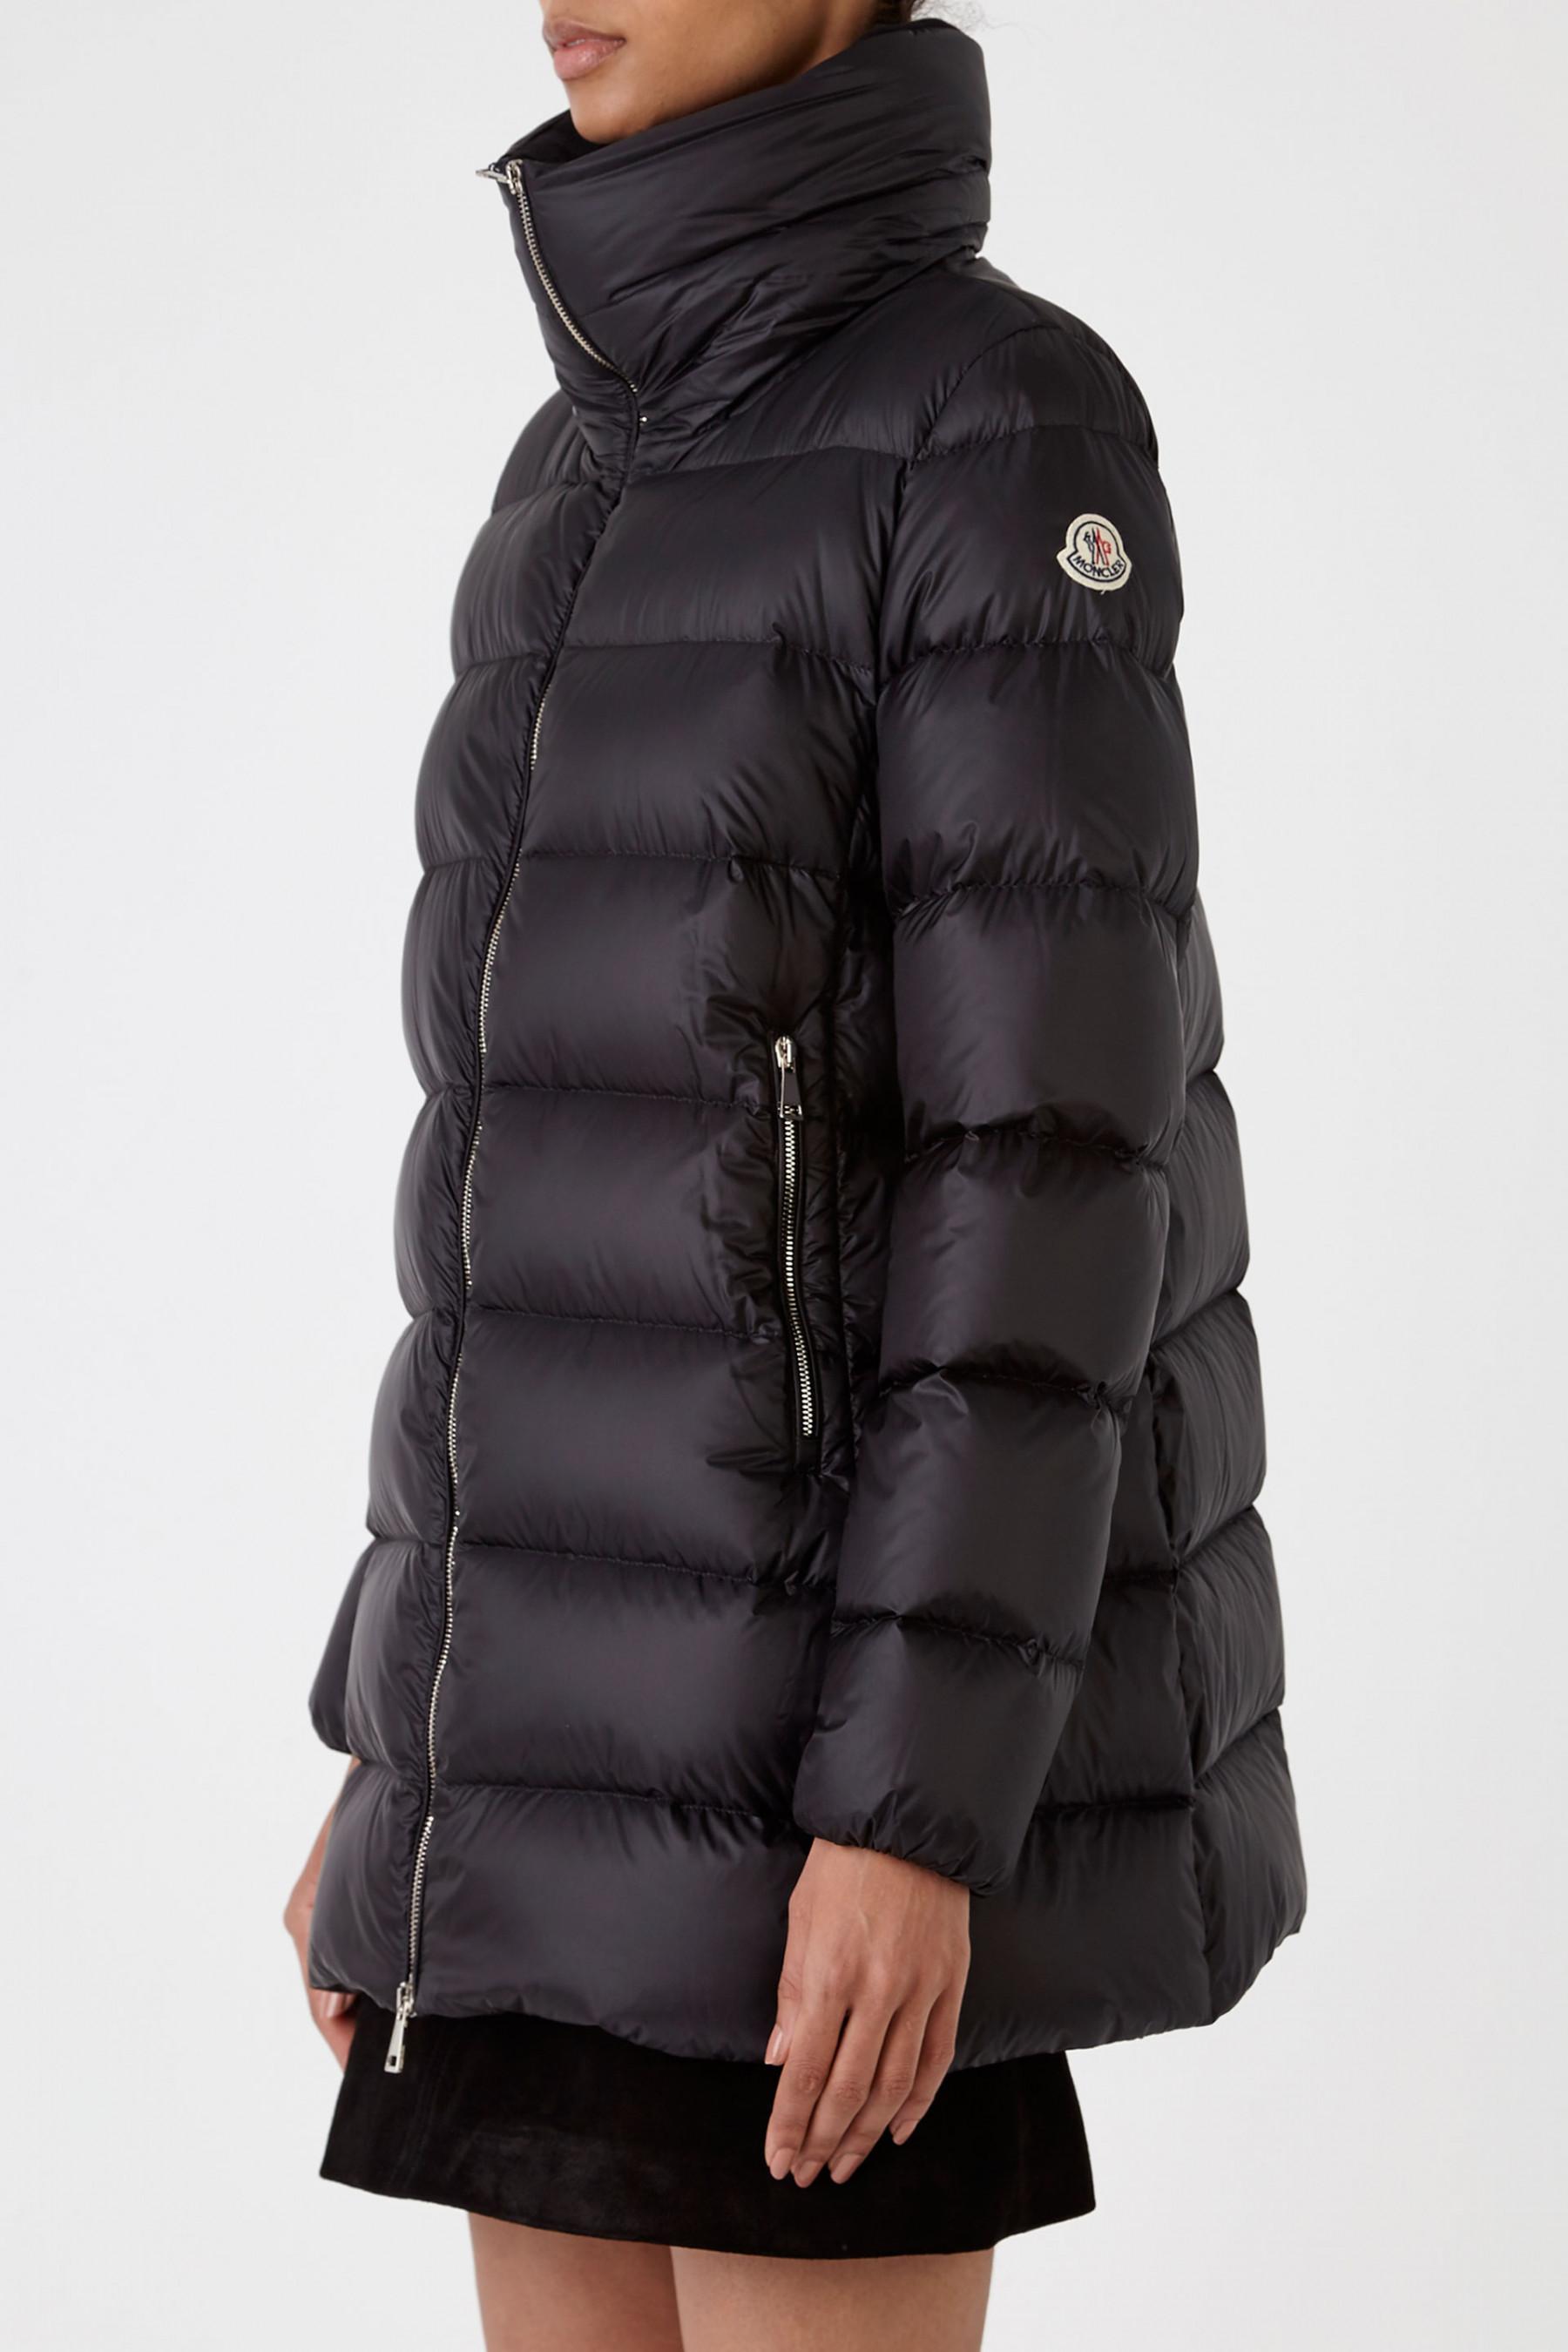 Lyst - Moncler Torcyn Quilted Shell Jacket in Black